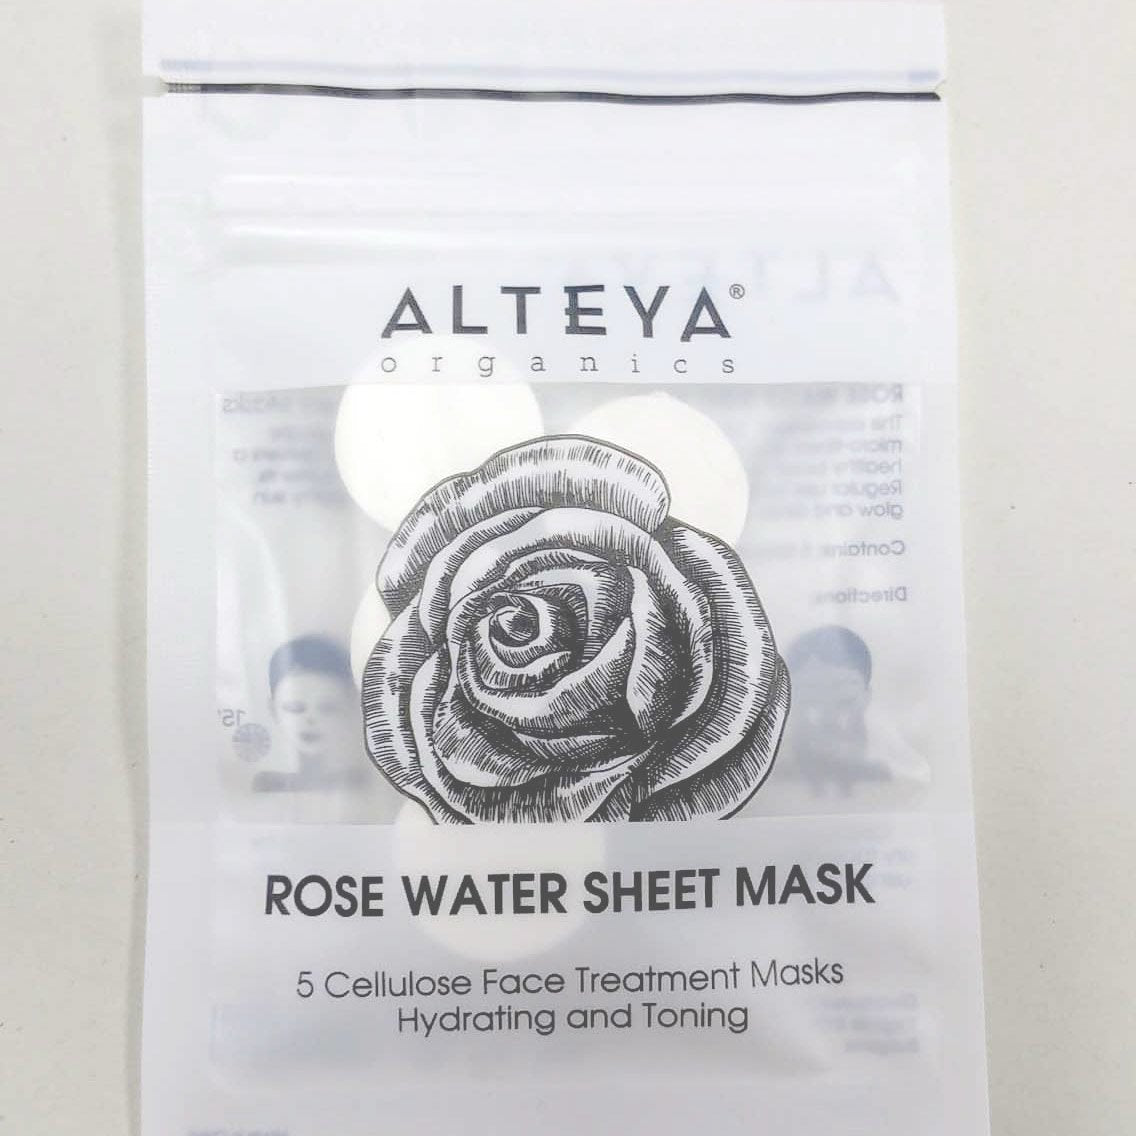 Alteya Organics Cellulose Face Masks - Pack of 2 is a refreshing and hydrating face mask infused with the natural benefits of rose water.